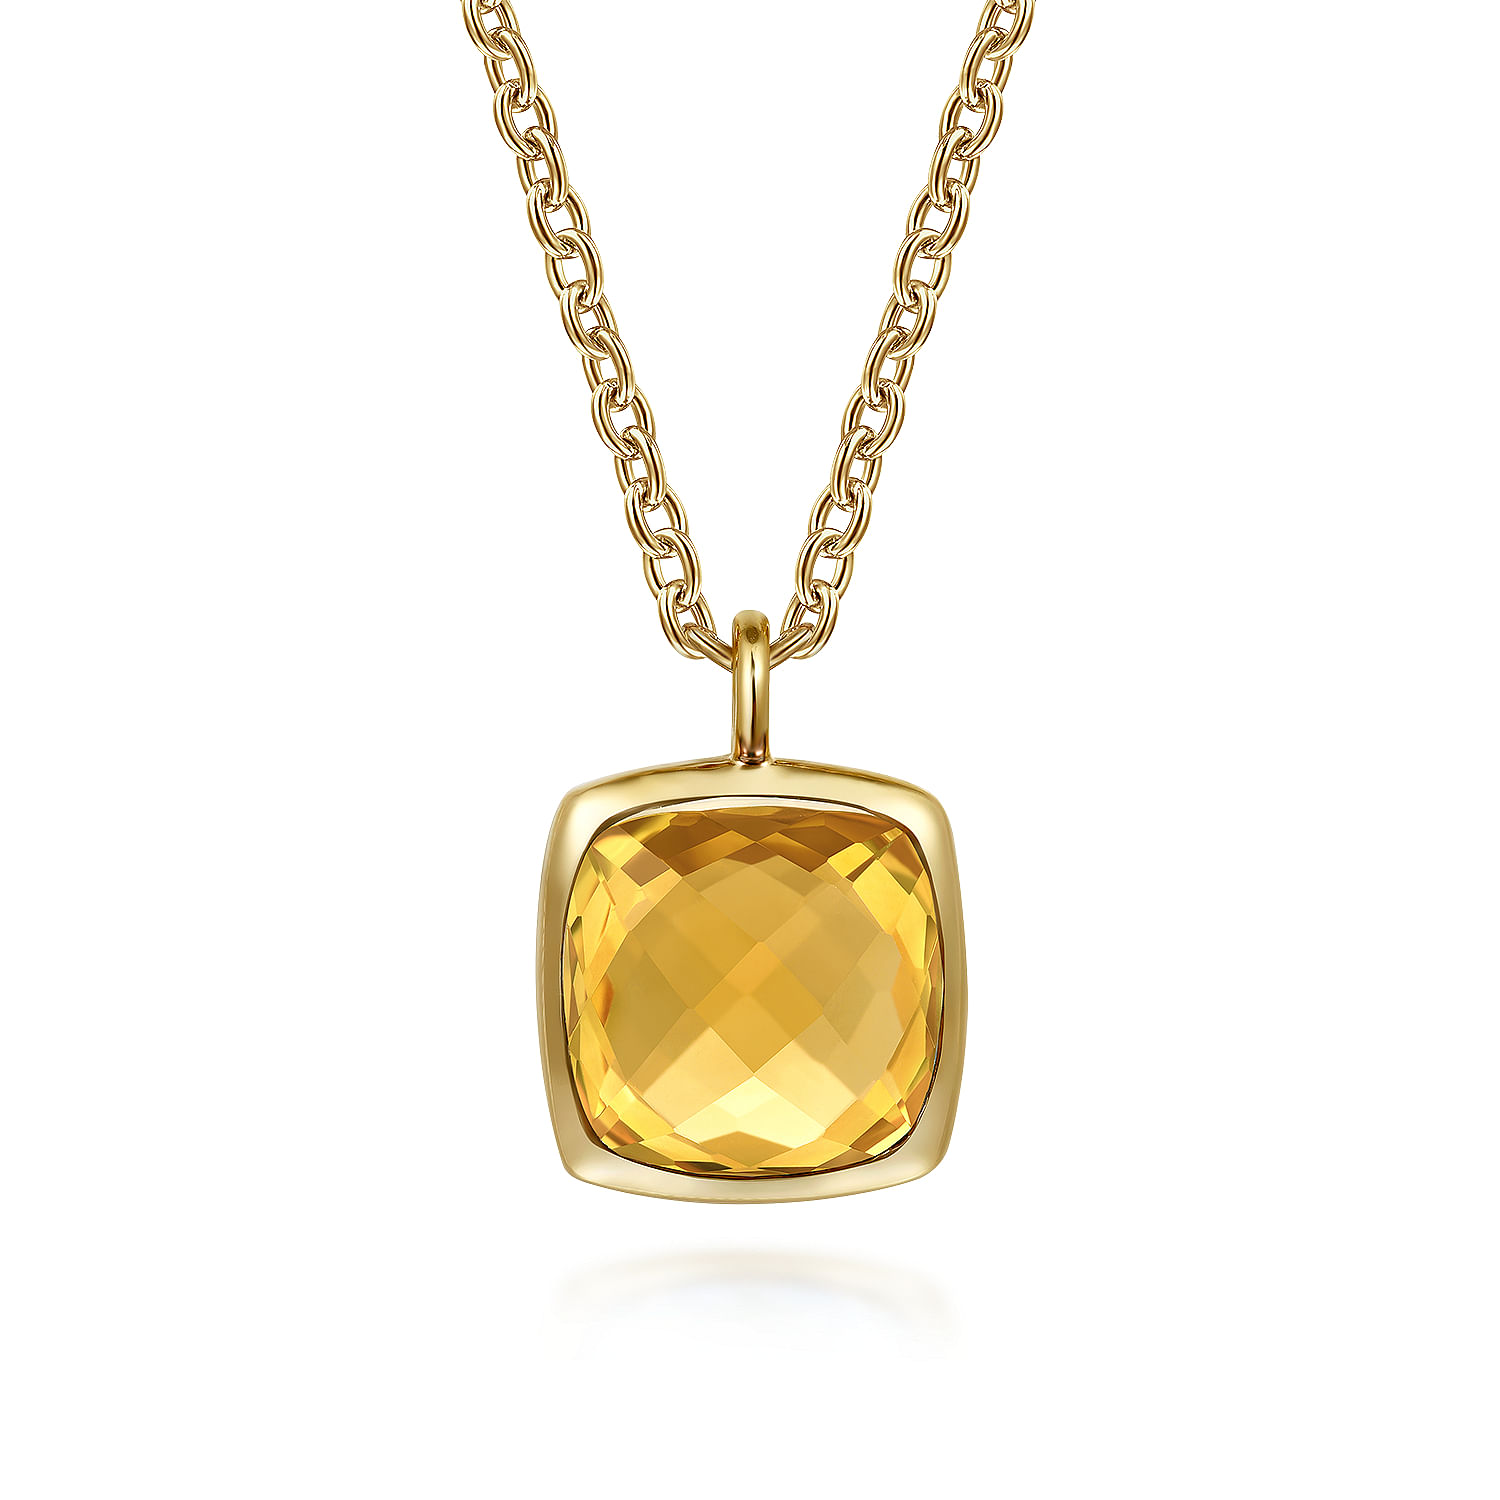 14K Yellow Gold Cushion Cut Citrine Necklace With Flower Pattern J-Back and Bezel Setting